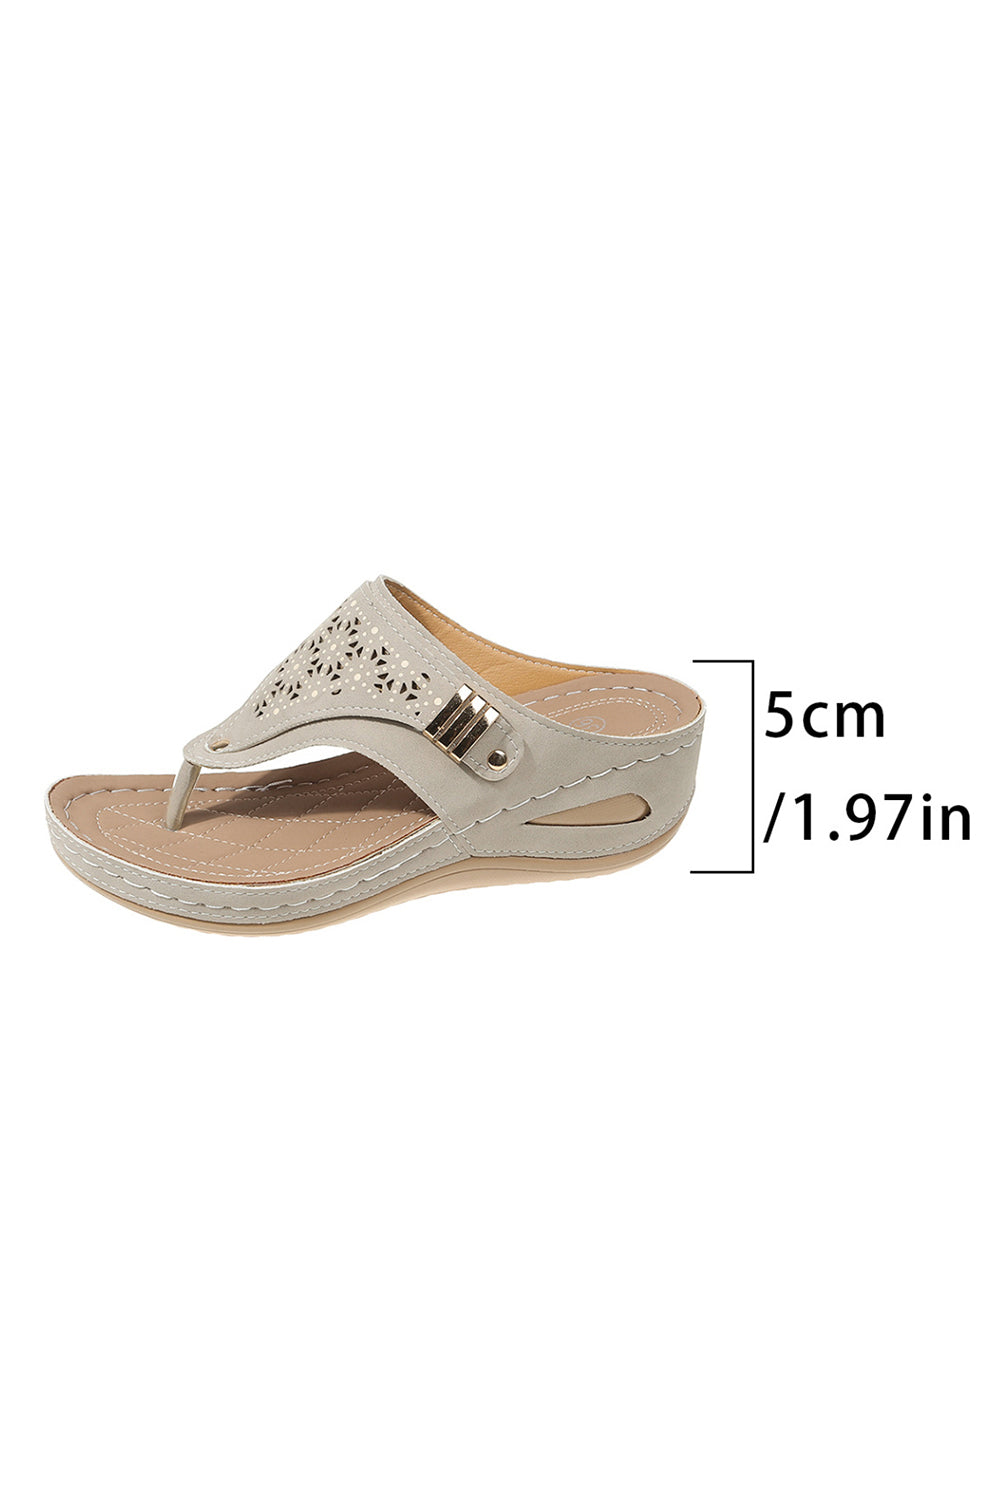 Beige Hollow Out Toe Post Thong Wedge Slides Shoes-ECB